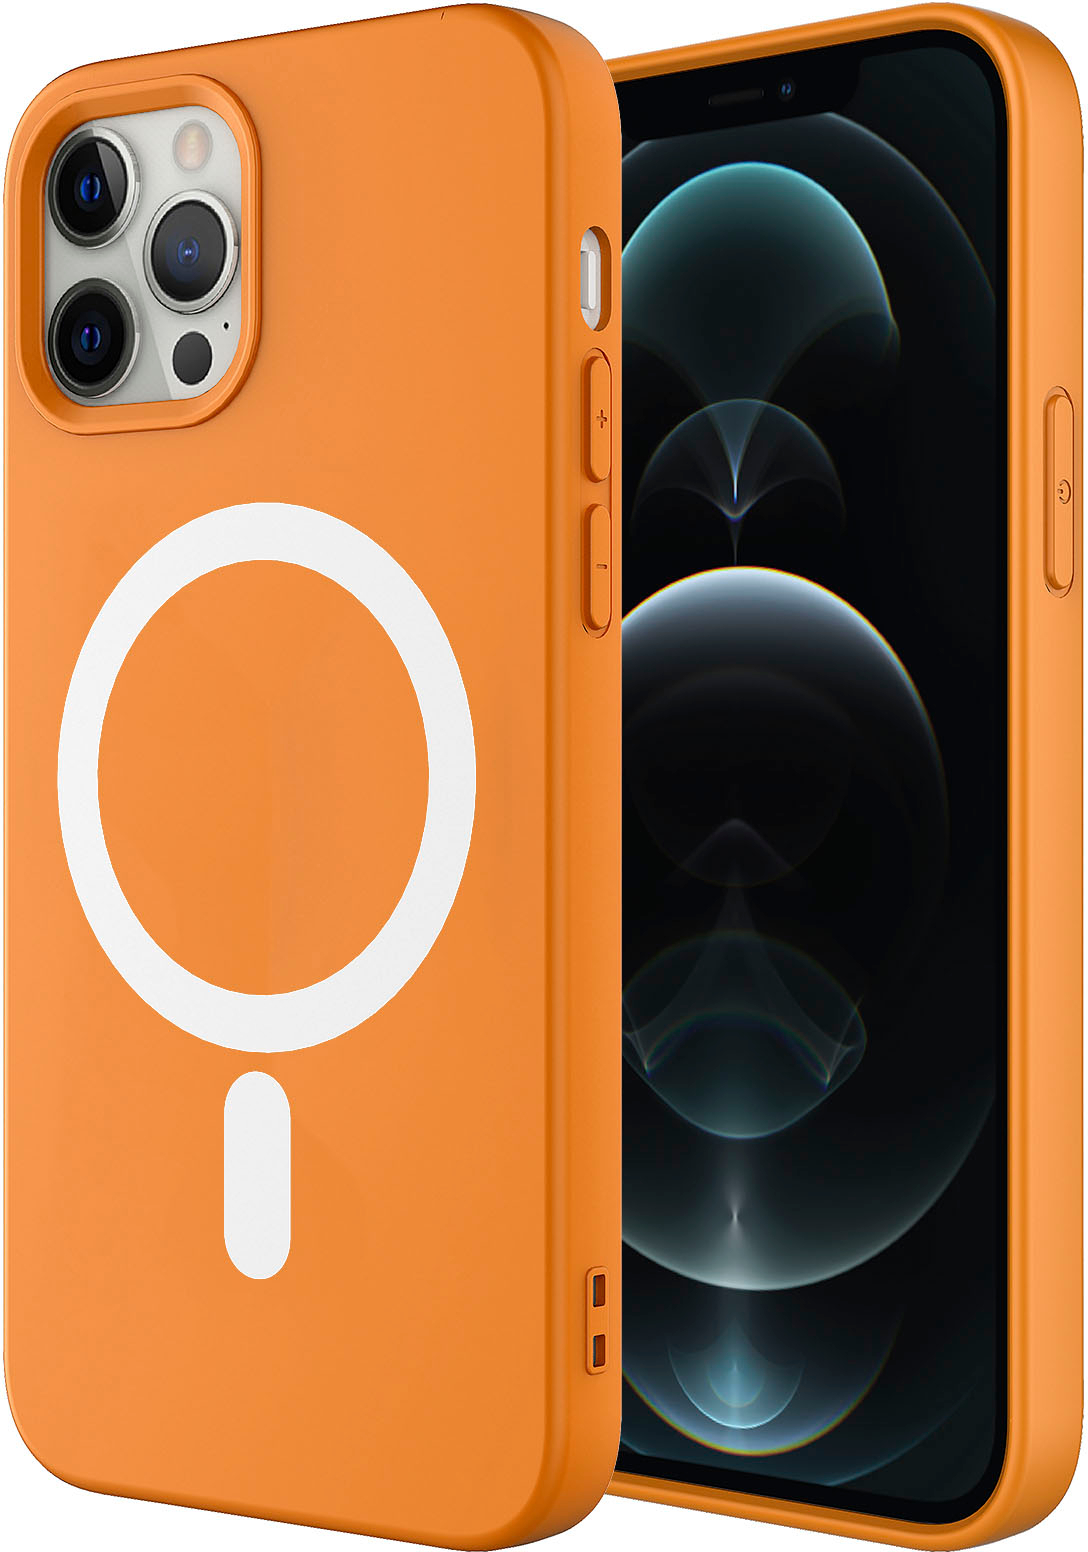 Angle View: AMPD - Real Feel Soft Case with MagSafe for Apple iPhone 12 Pro / iPhone 12 - Orange